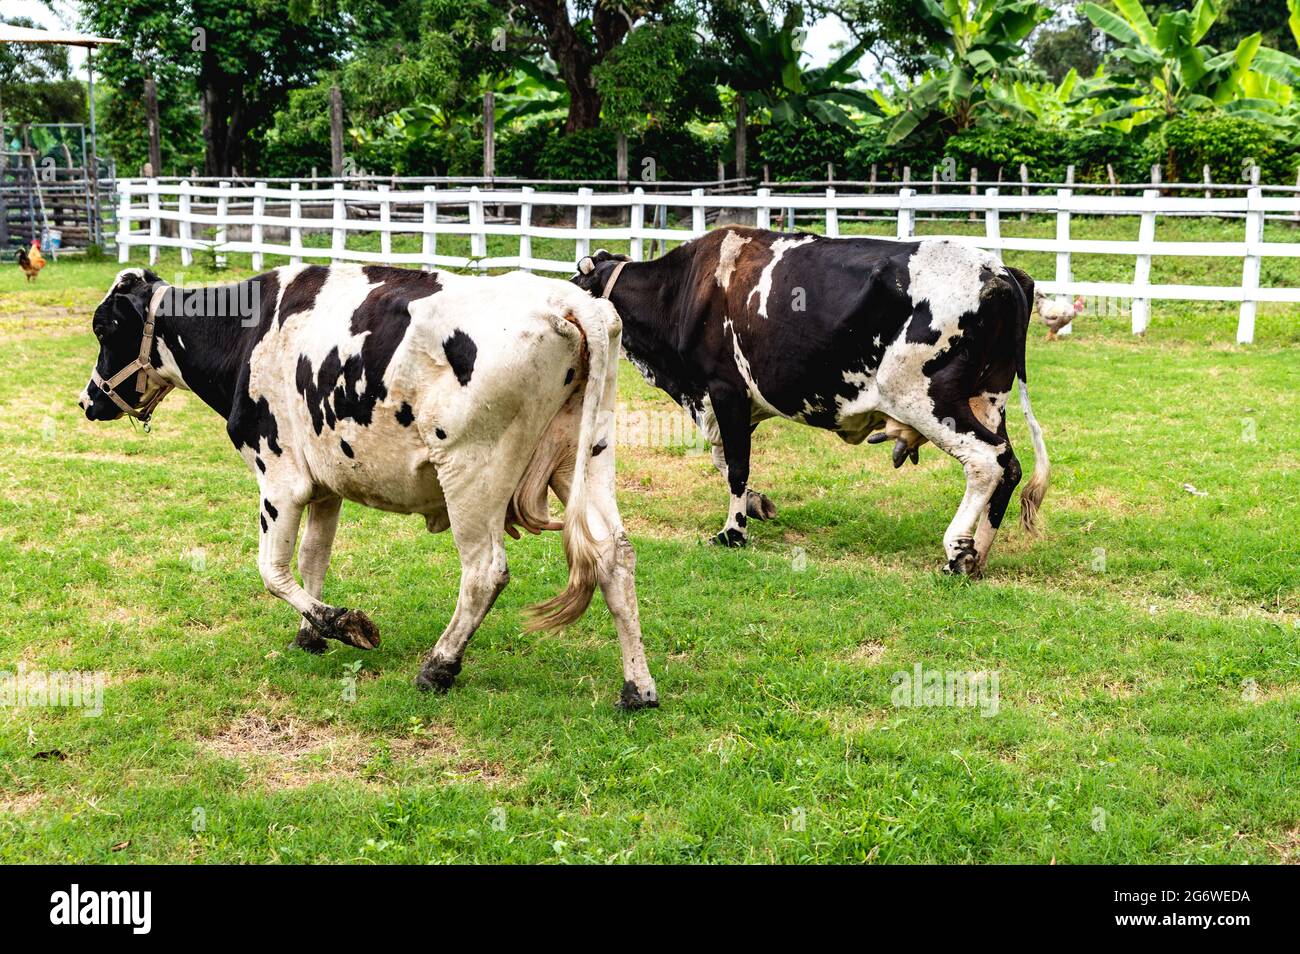 Two cows walking in a field inside a ranch. Trees and a fence and green grass also in the shot. One white cow and one black cow. Stock Photo